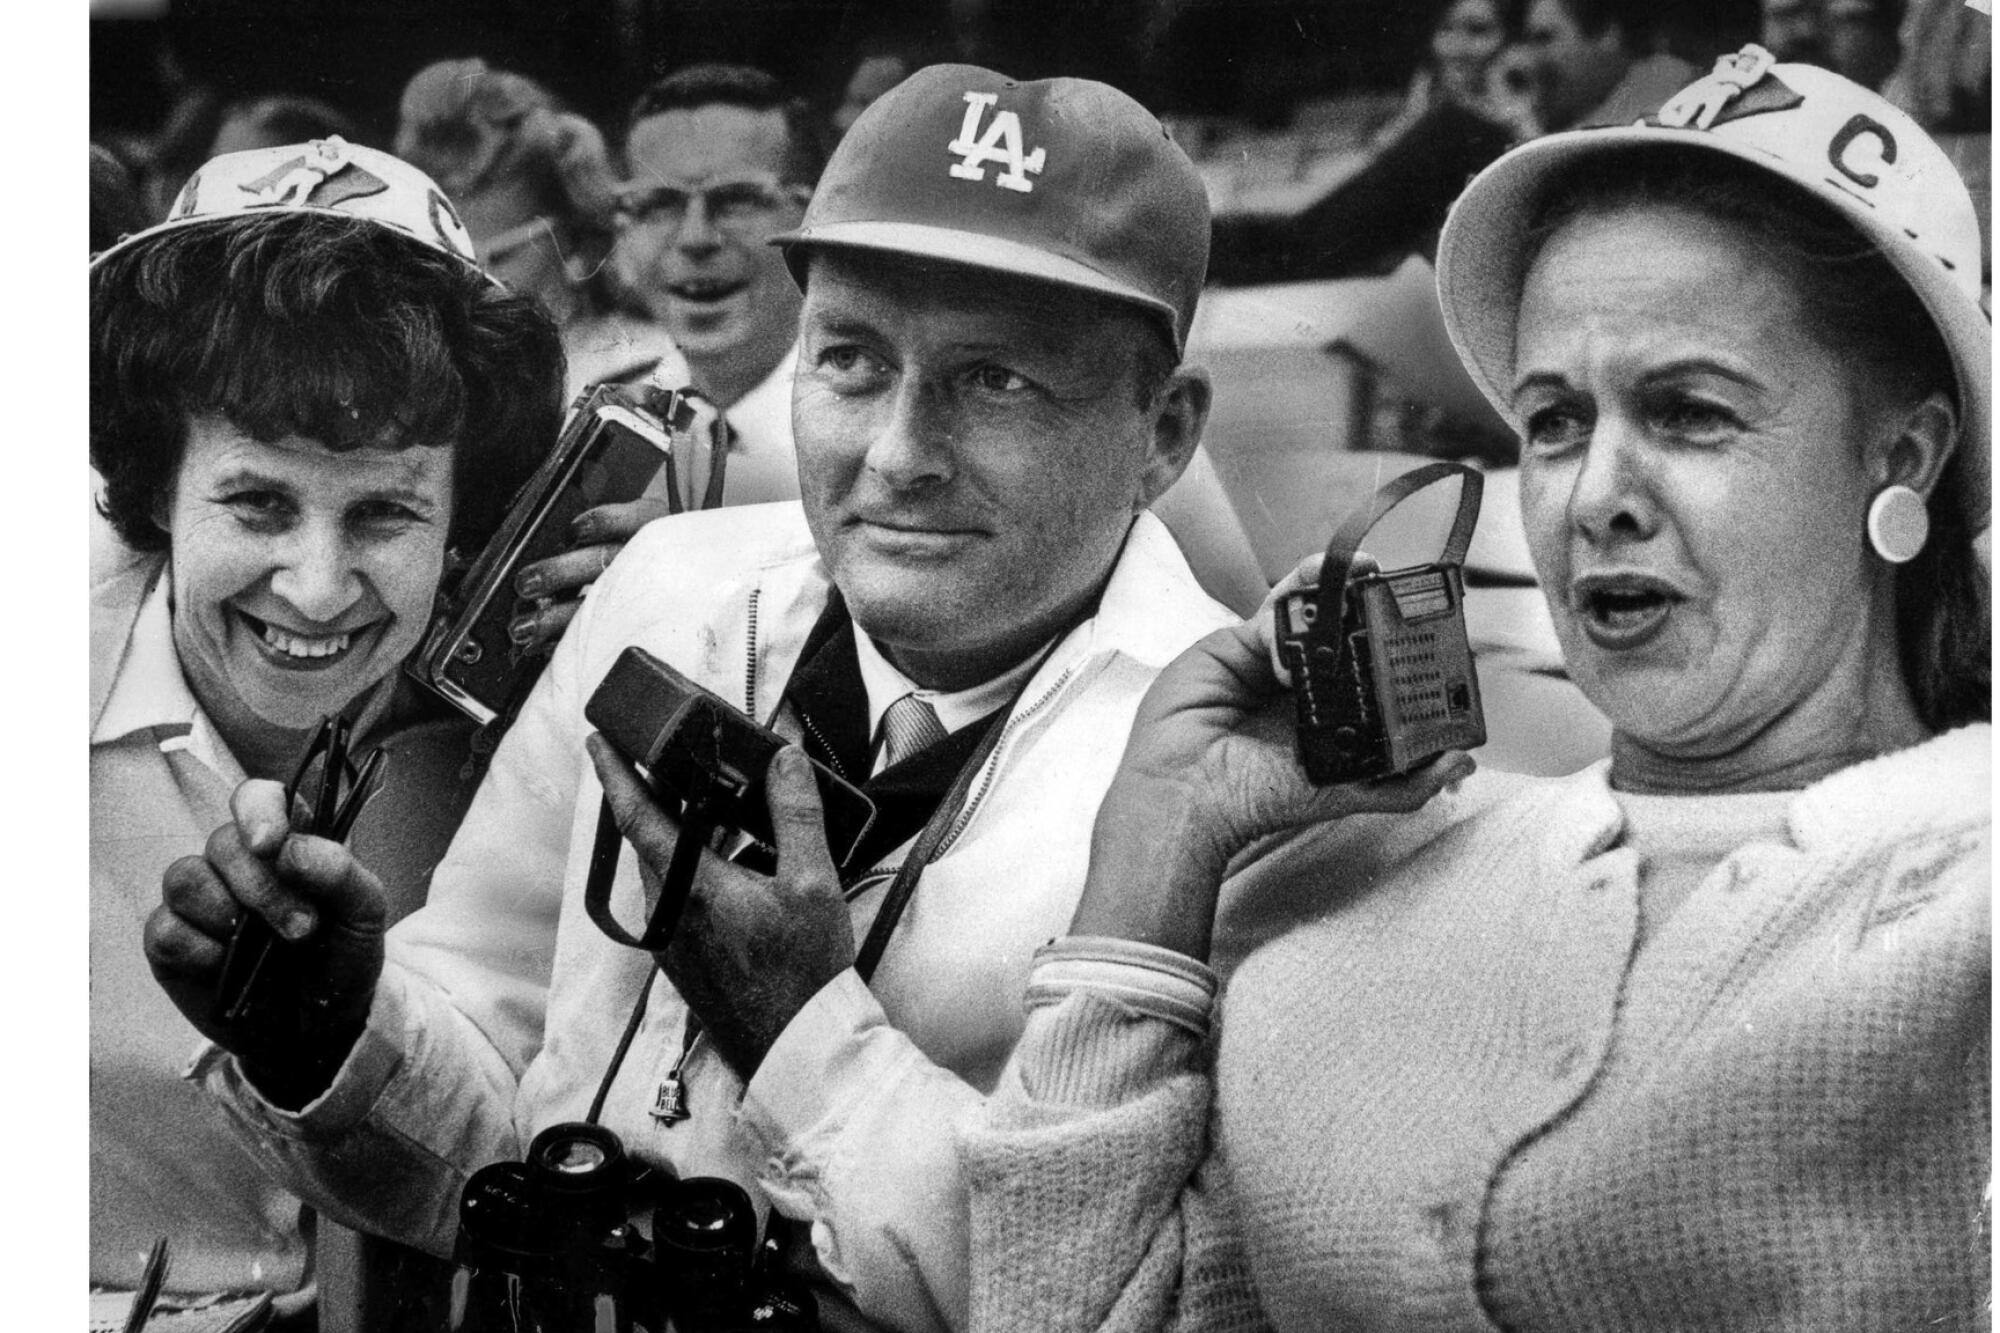 Dodgers booster club members listen to Vin Scully on the radio during a game.